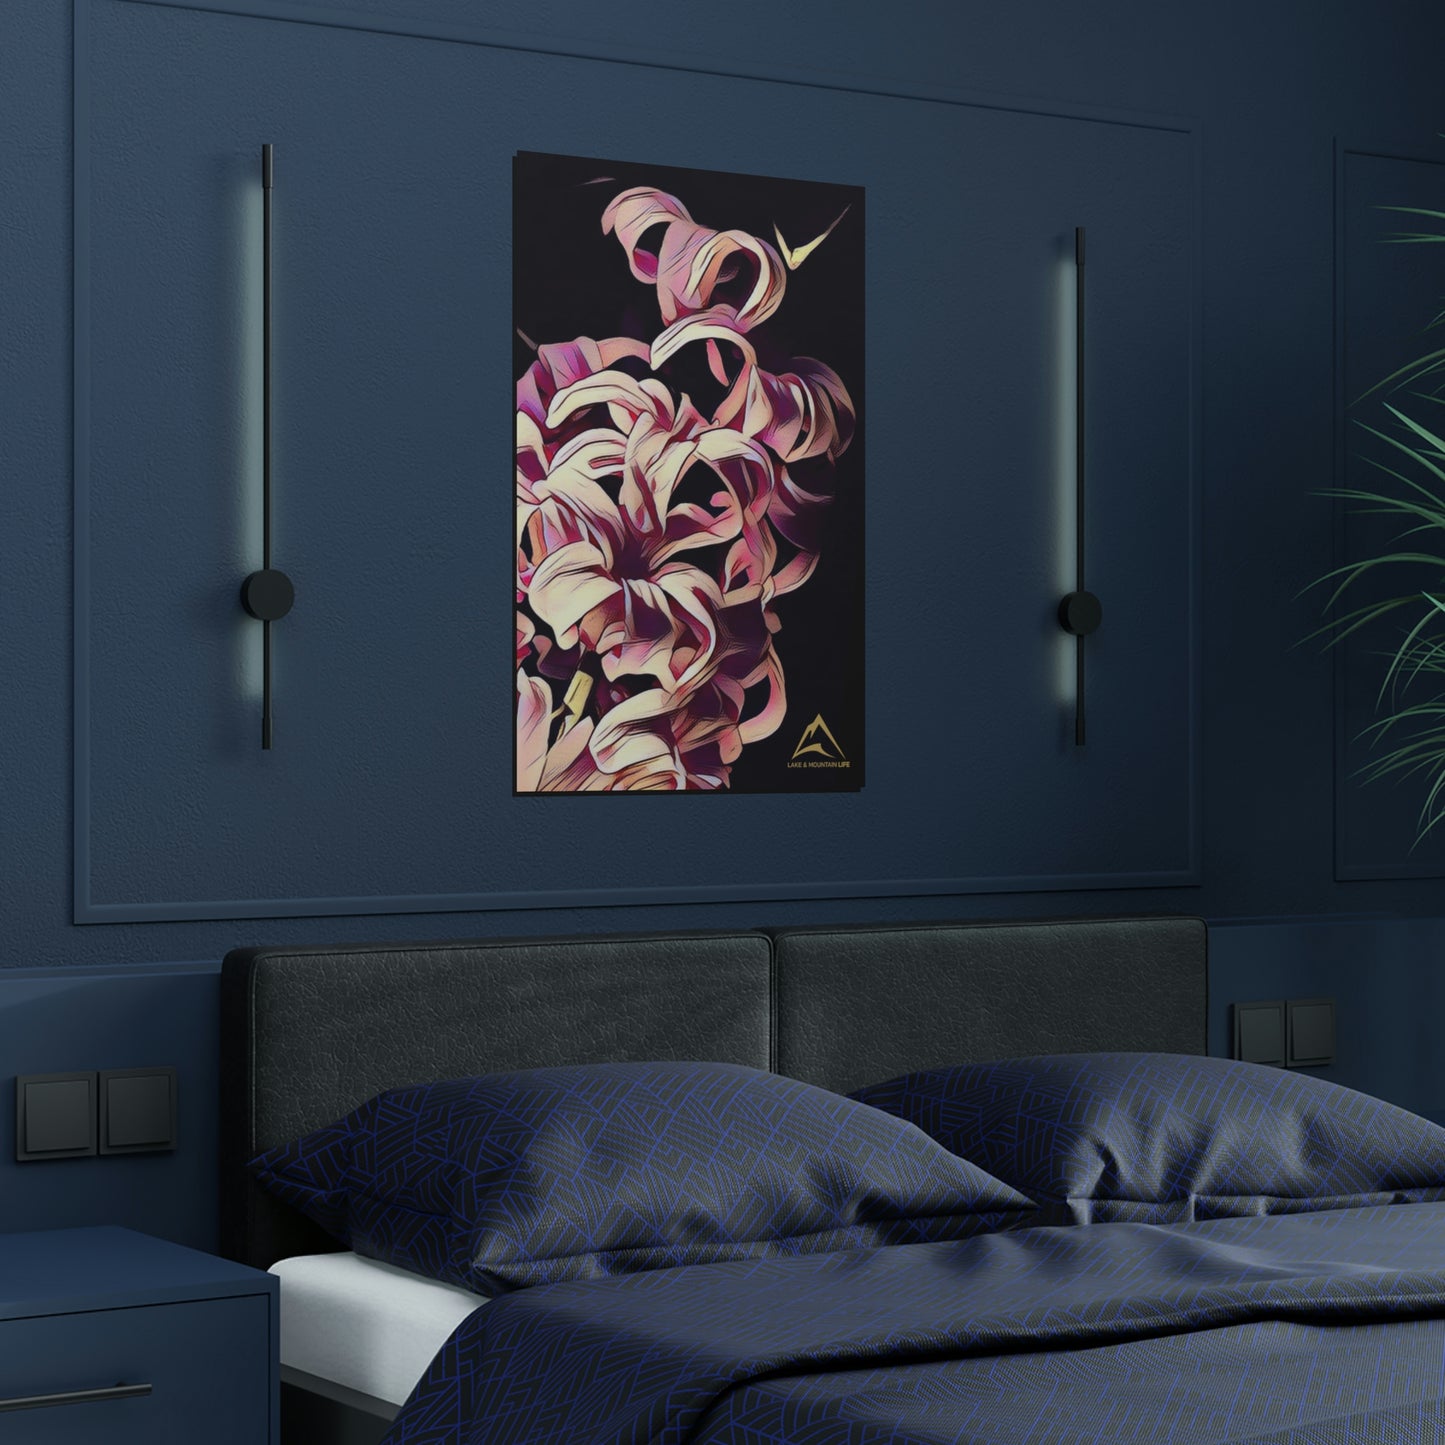 Satin Posters (300gsm) | Graphic: Floral Beauty